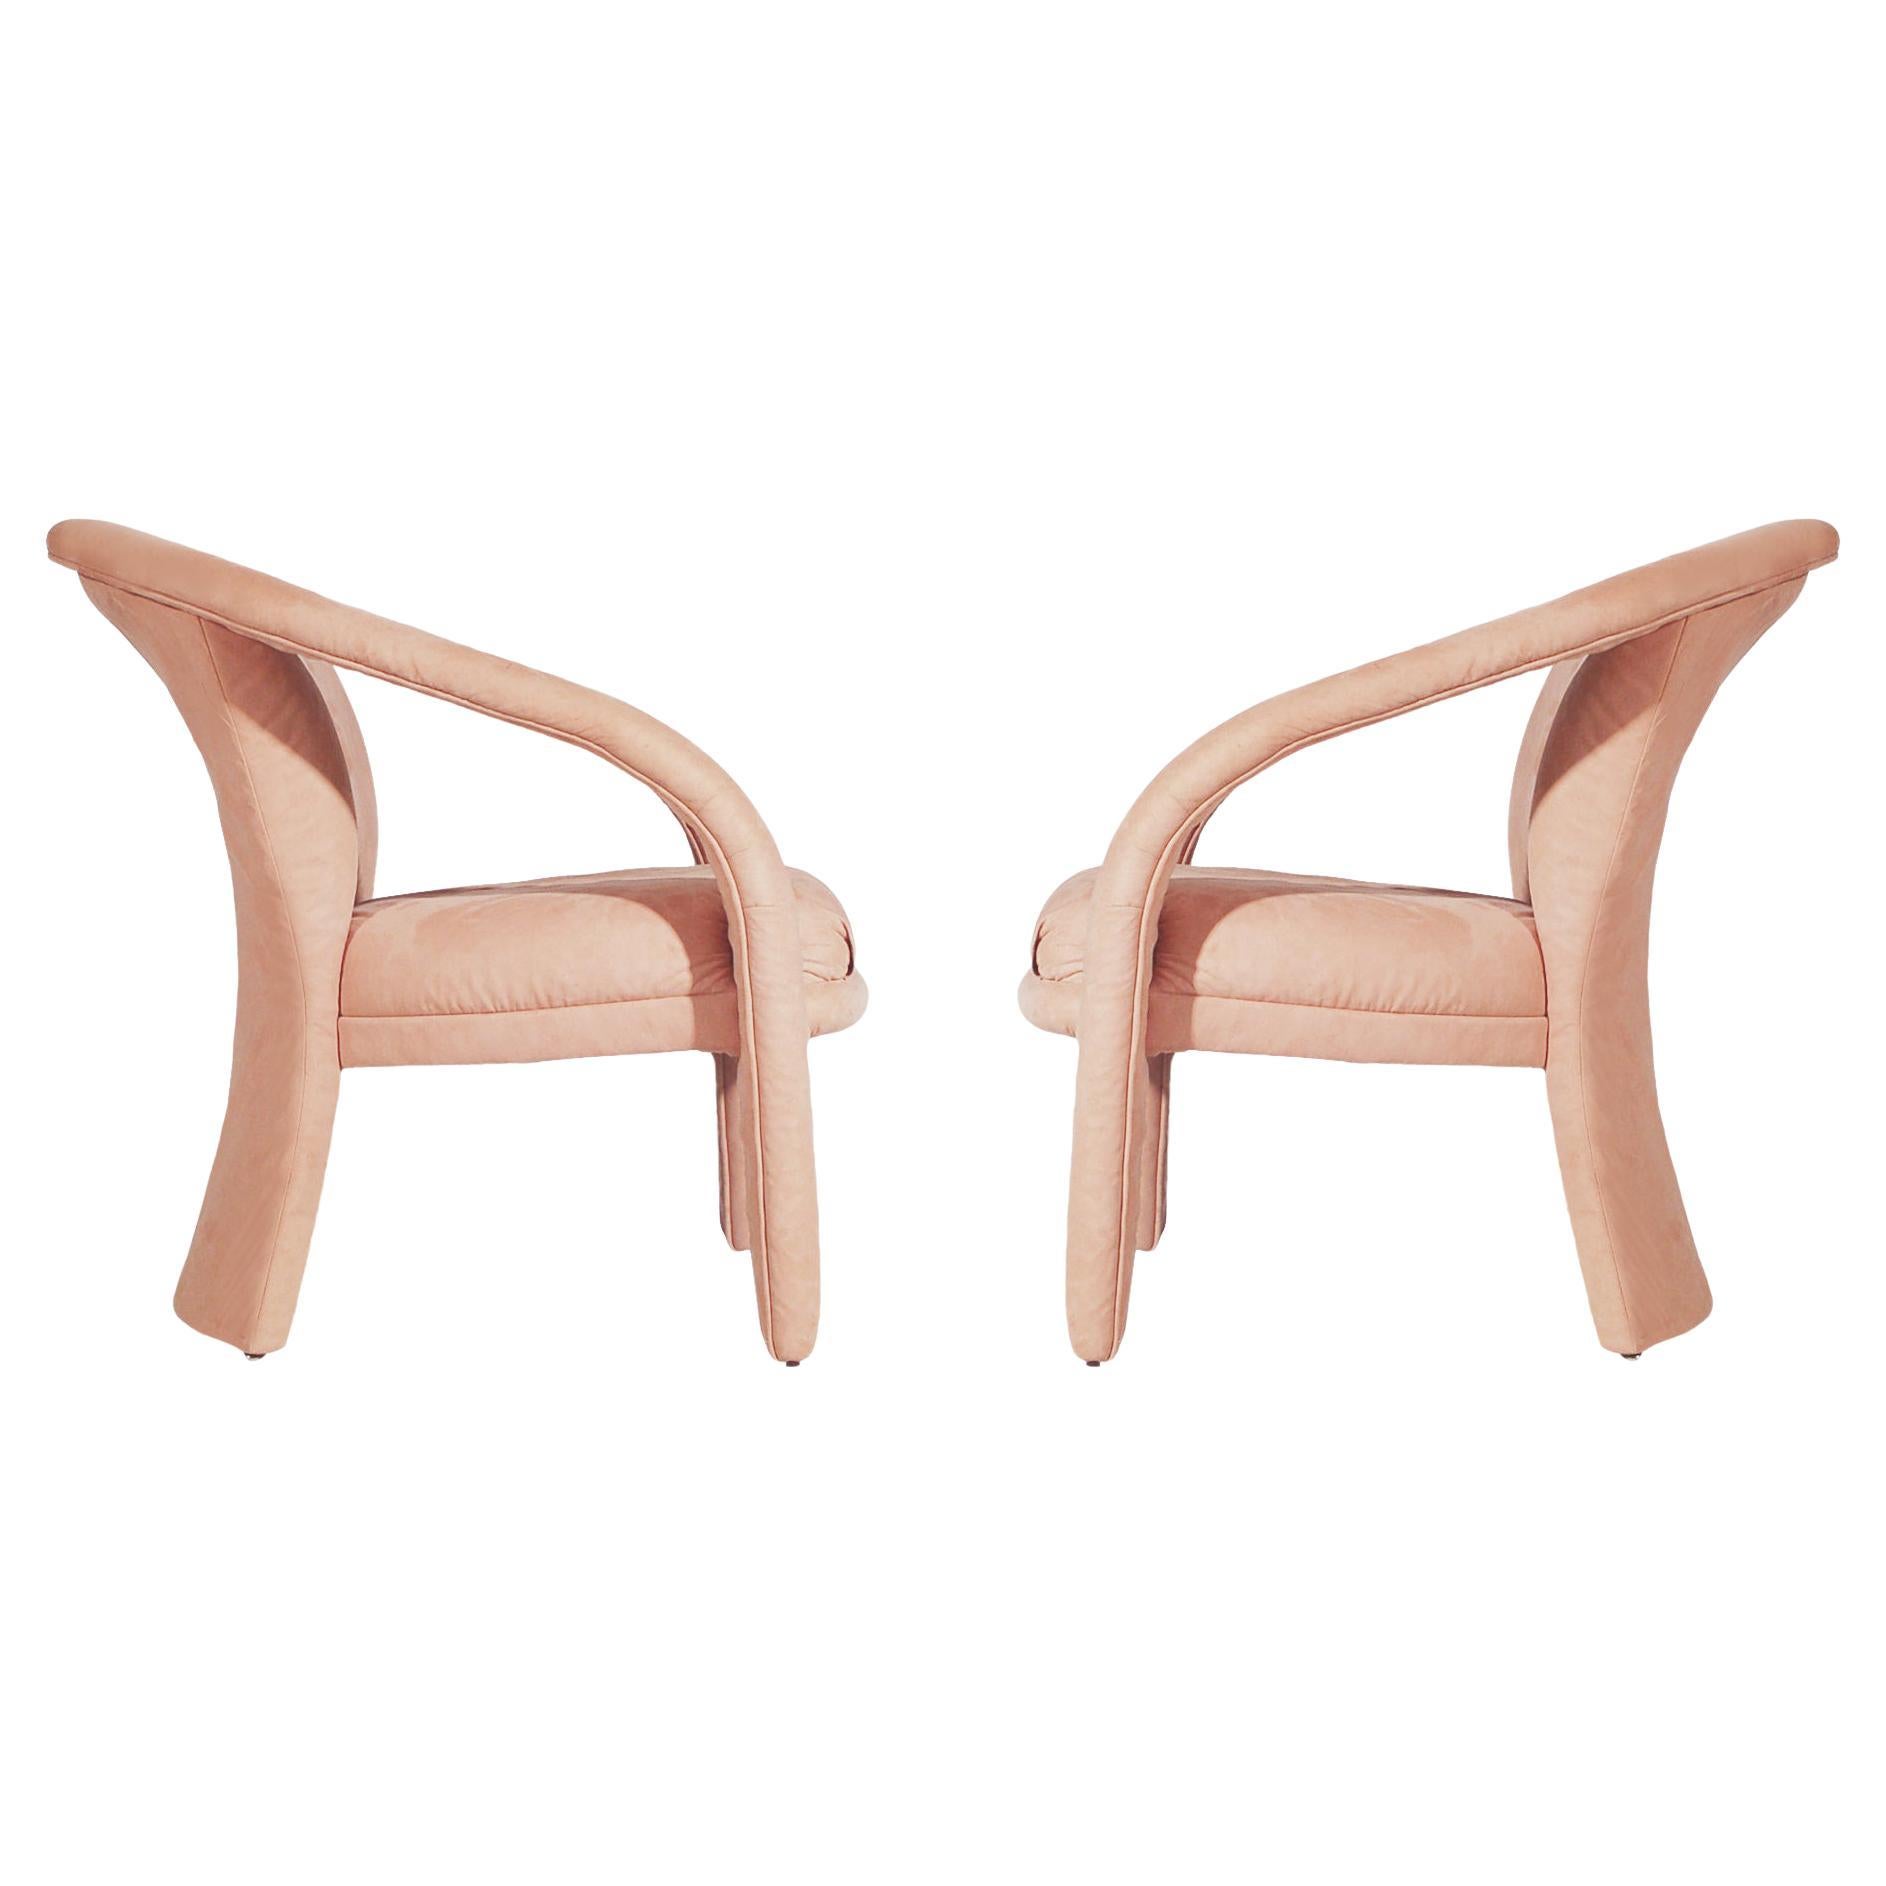 Pair of Decorator Mid Century Post Modern Armchair Lounge Chairs in Blush Pink